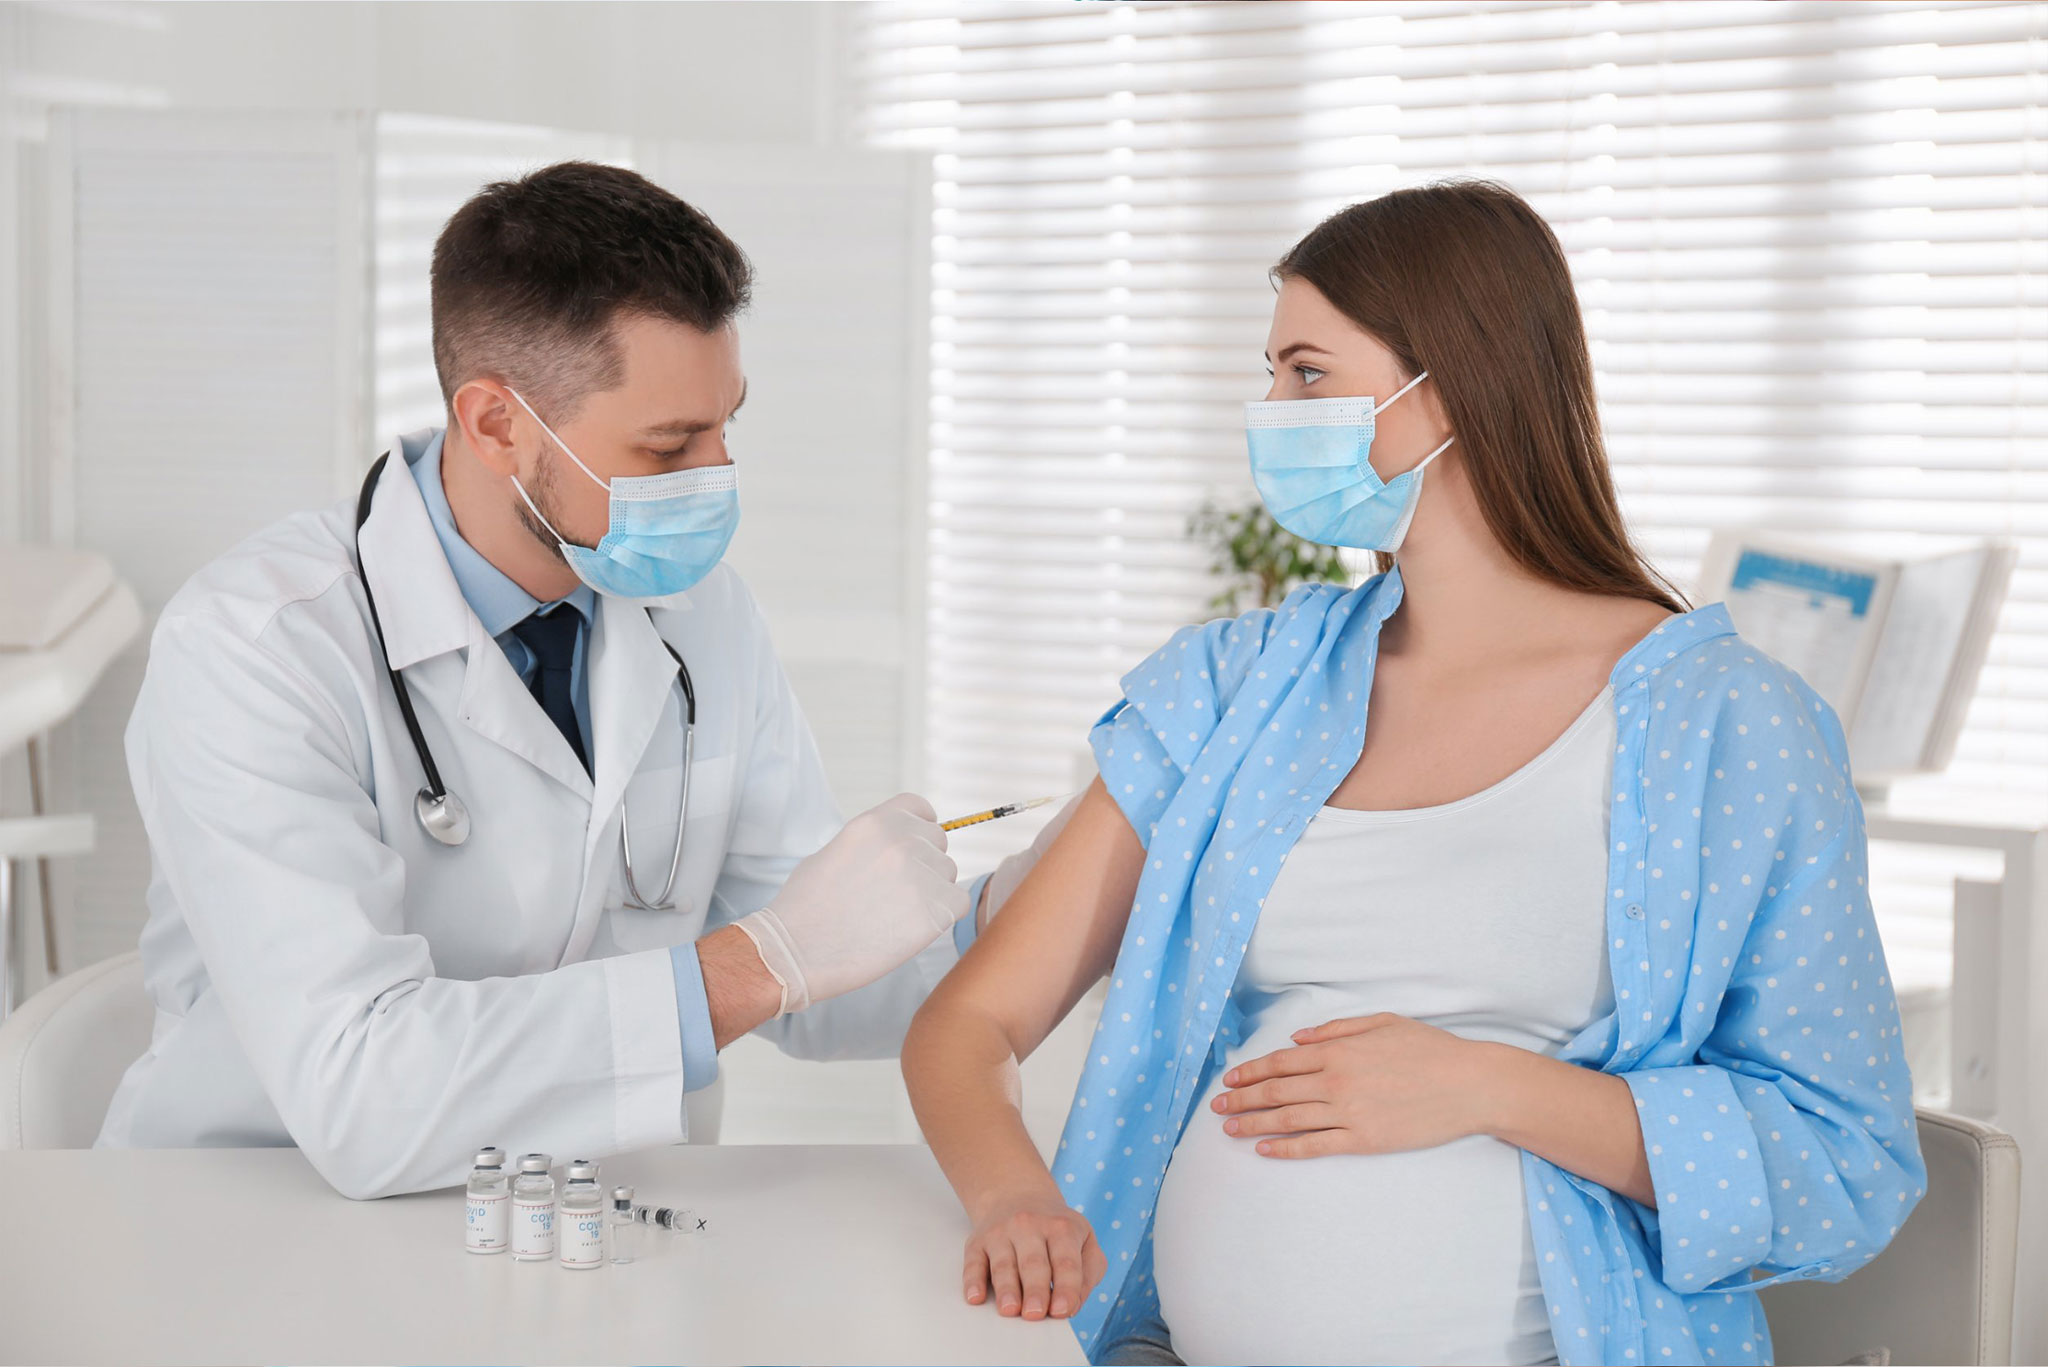 A doctor vaccinates a pregnant woman in a clinical setting.